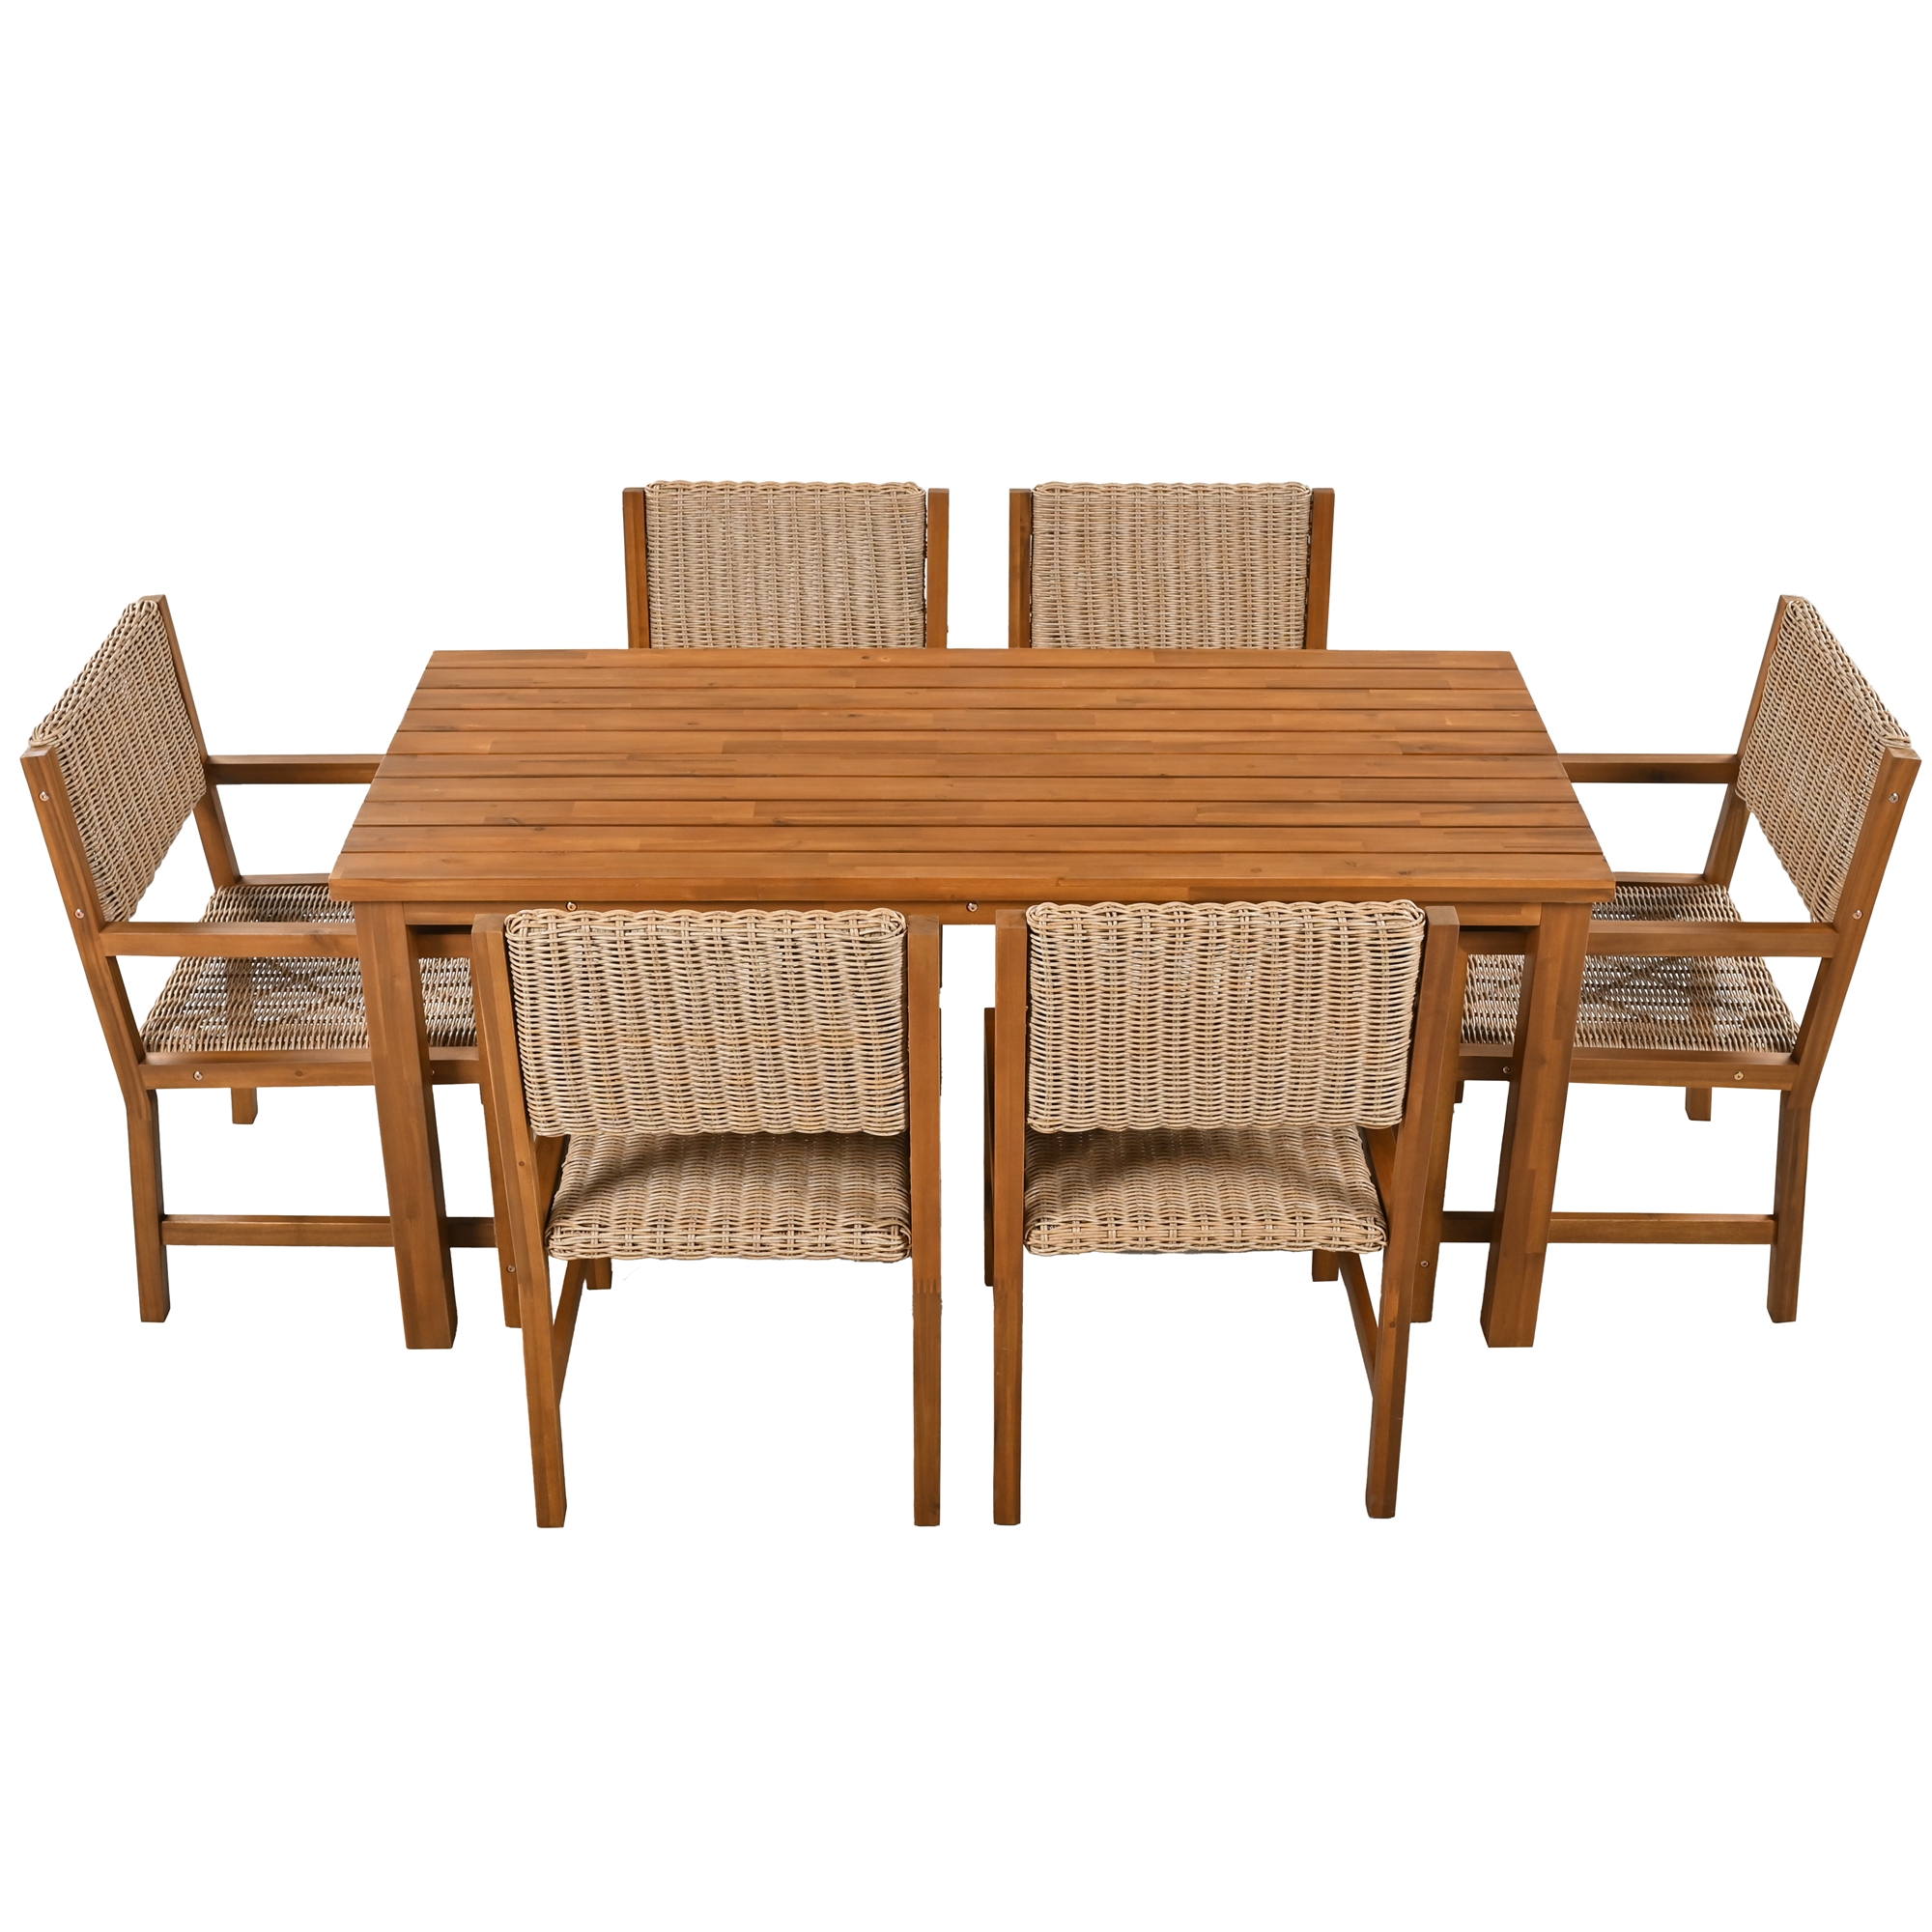 7 Piece Patio Rattan Dining Set, Outdoor Space Saving Rattan Chairs with Acacia Wood Table, All-Weather Dining Table and Chairs Set, HDPE Rattan Dining Chairs Set for Balcony Patio Garden Poolside - image 4 of 8